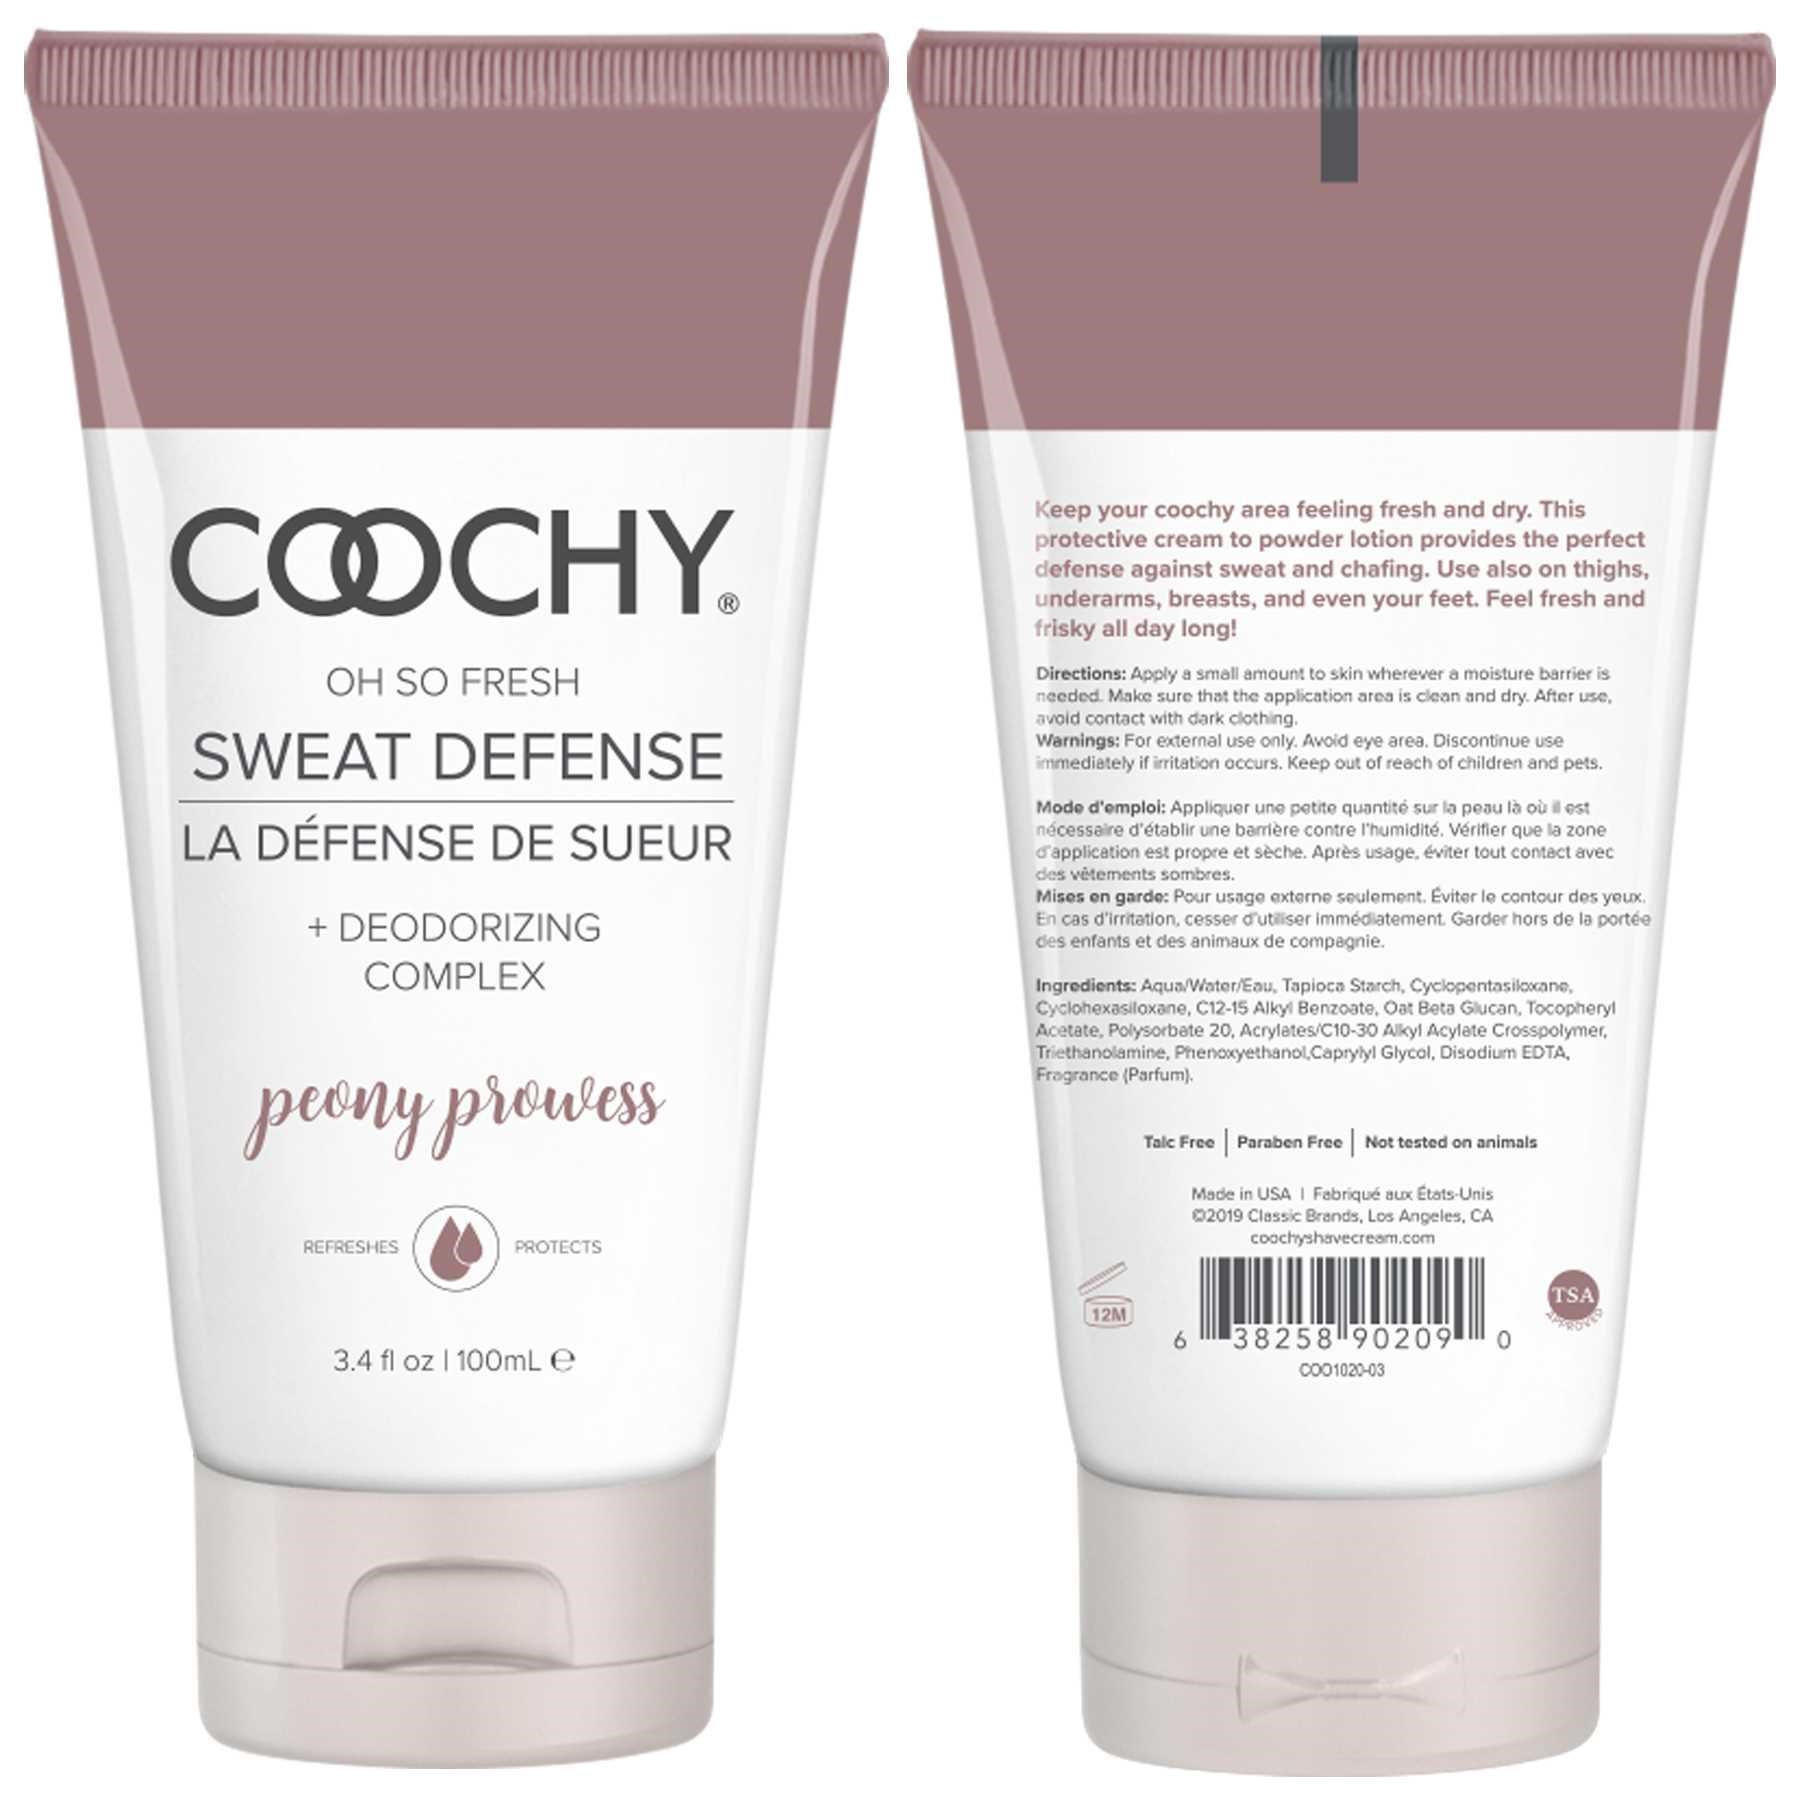 COOCHY Oh So Fresh Sweat Defense Cream front & back of tube